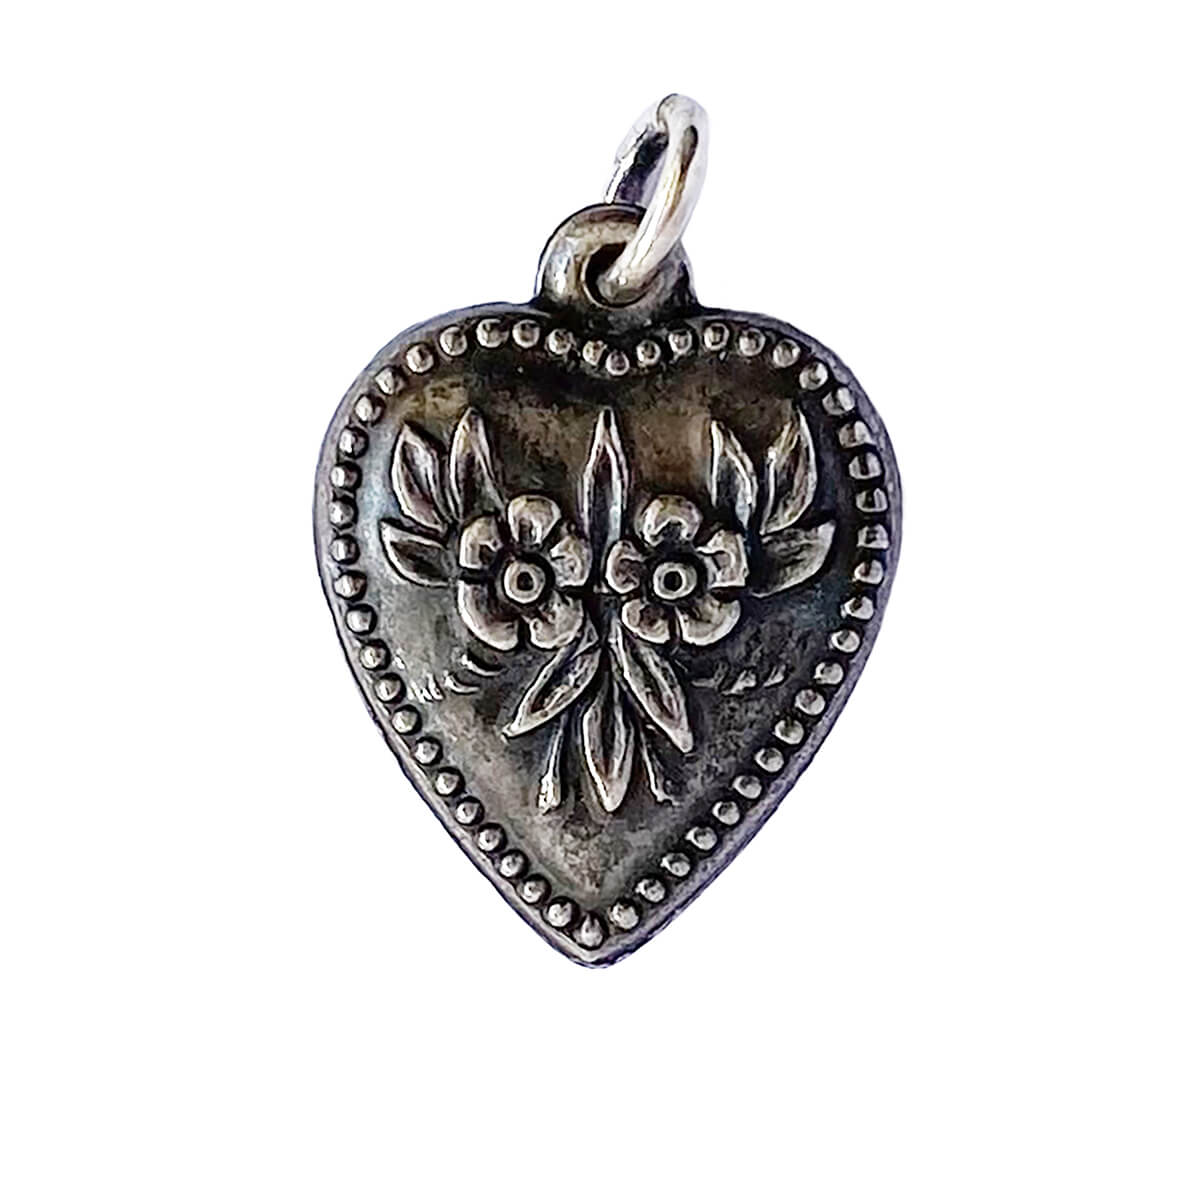 Vintage 1940s puffy heart with floral and dotted frame charm sterling silver pendant from Charmarama